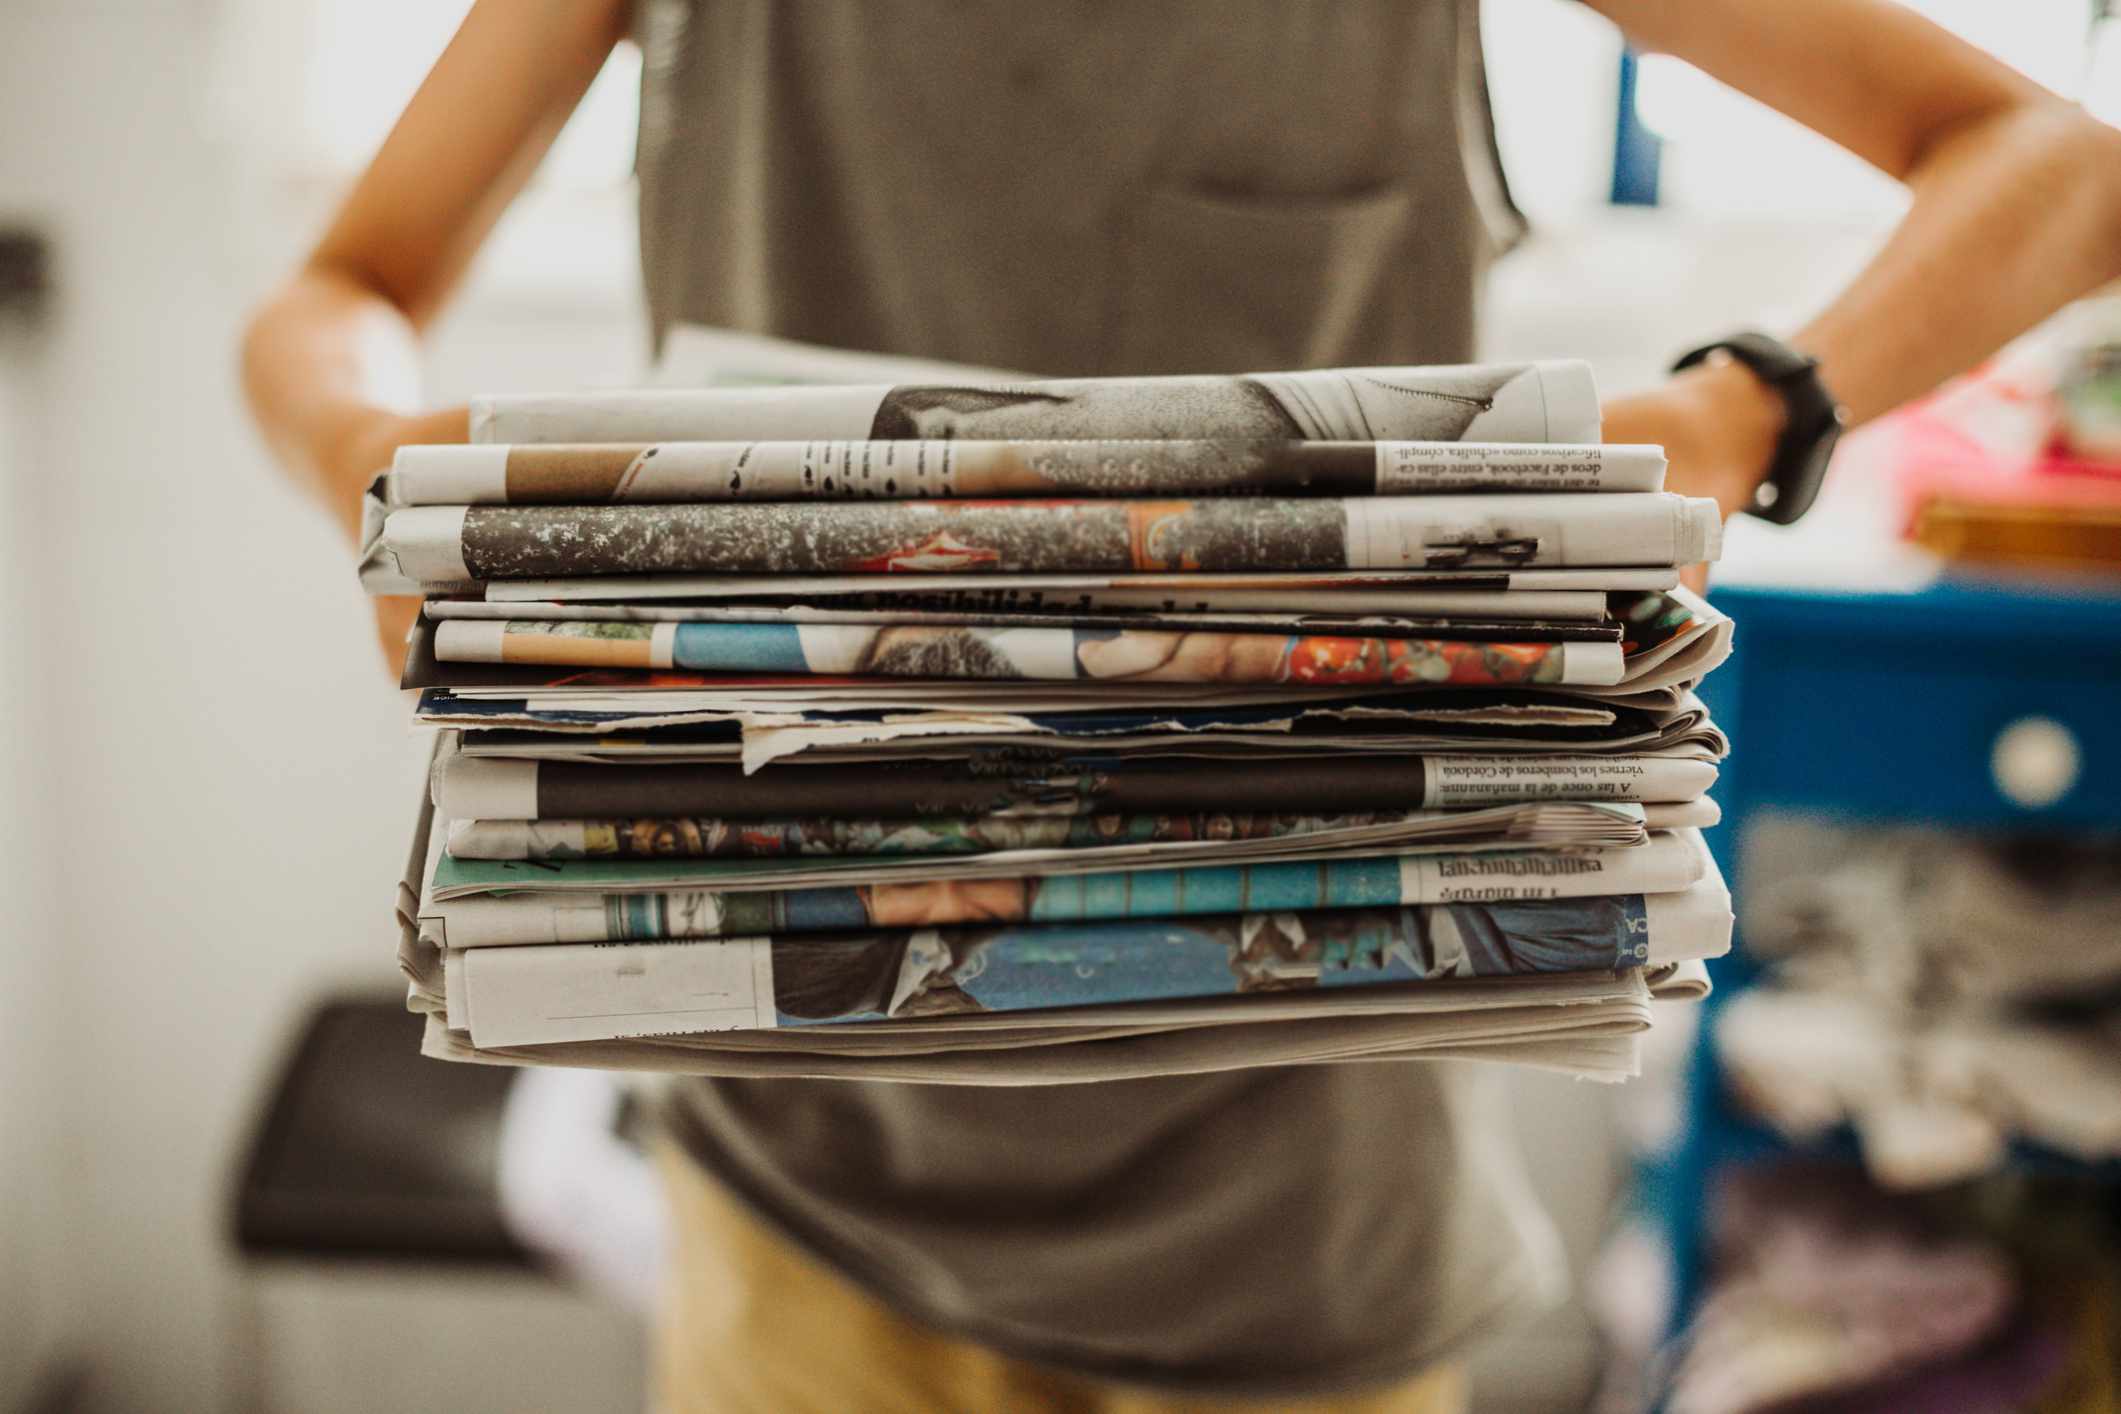 midsection of person holding a pile of newspapers